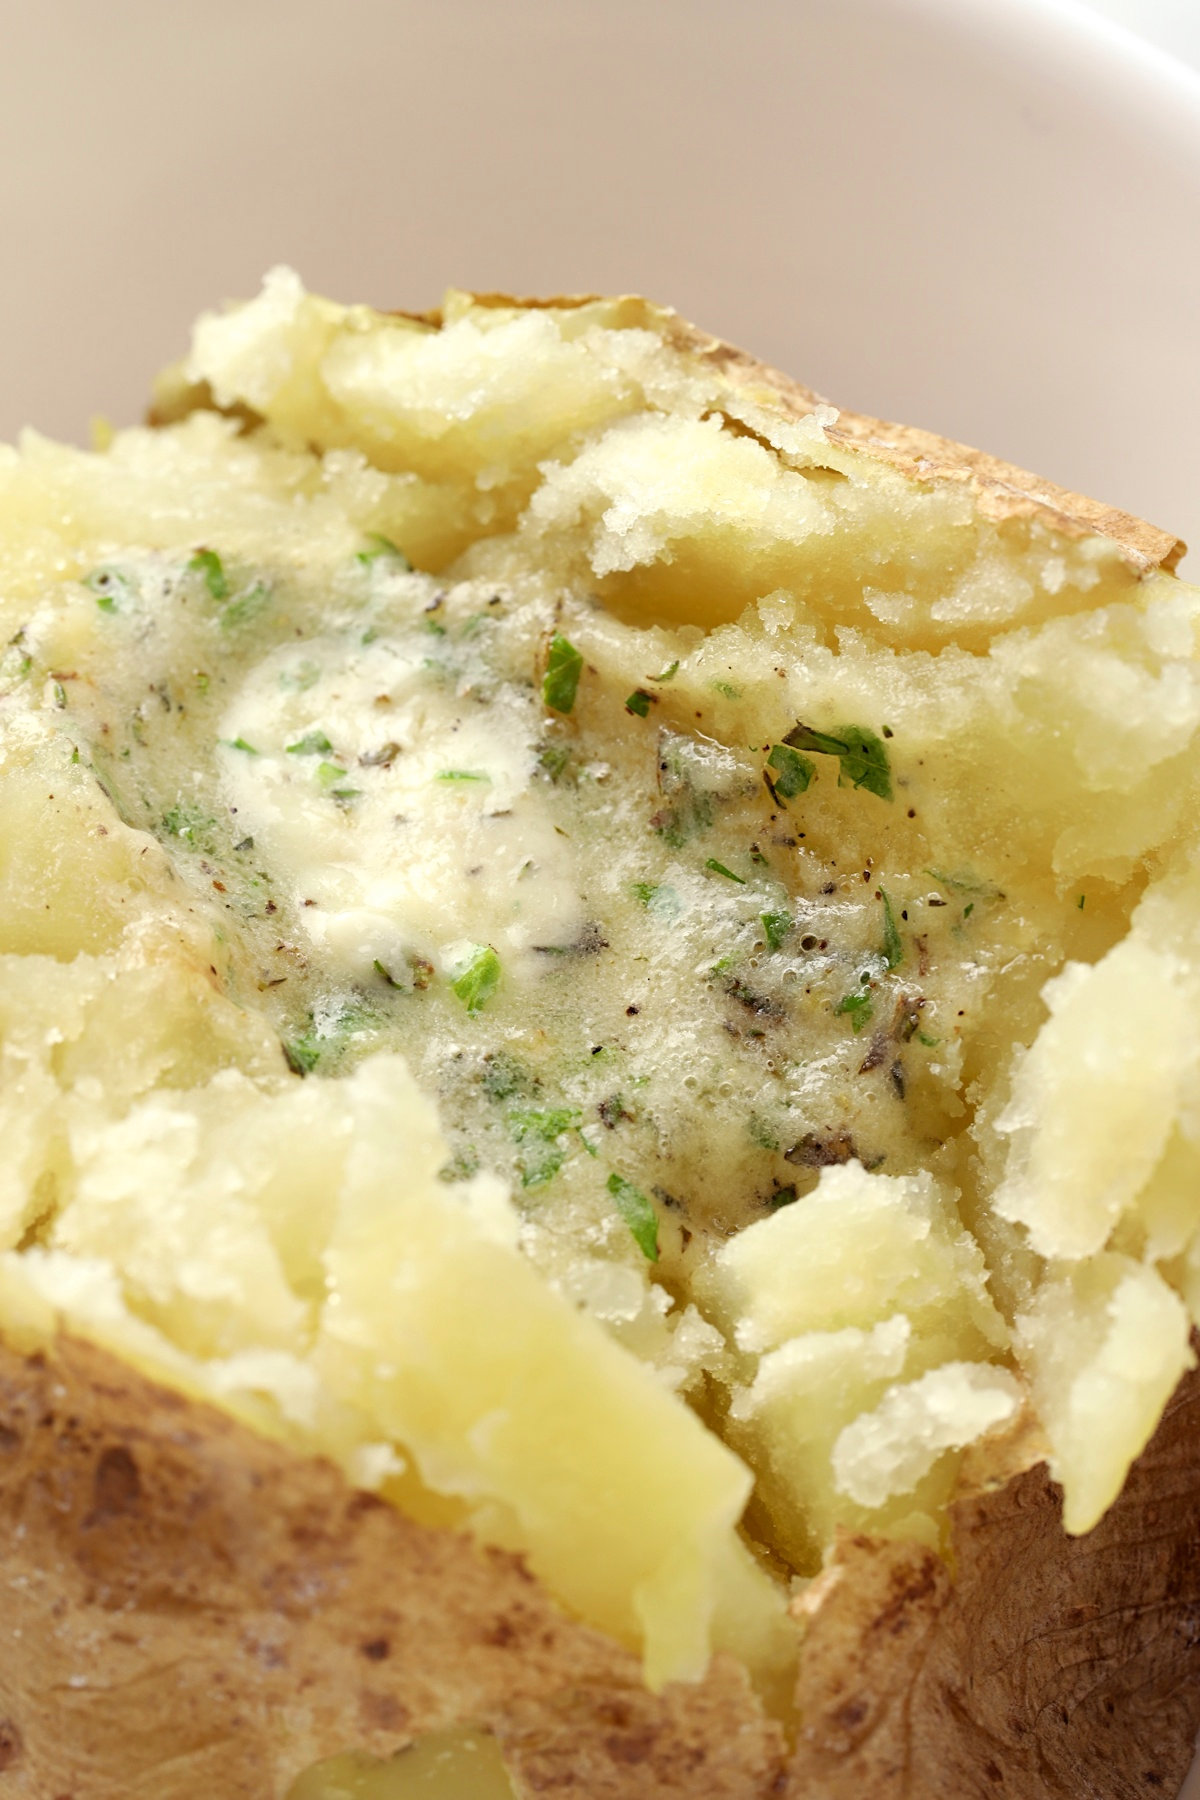 Compound butter melting on top of a baked potato.